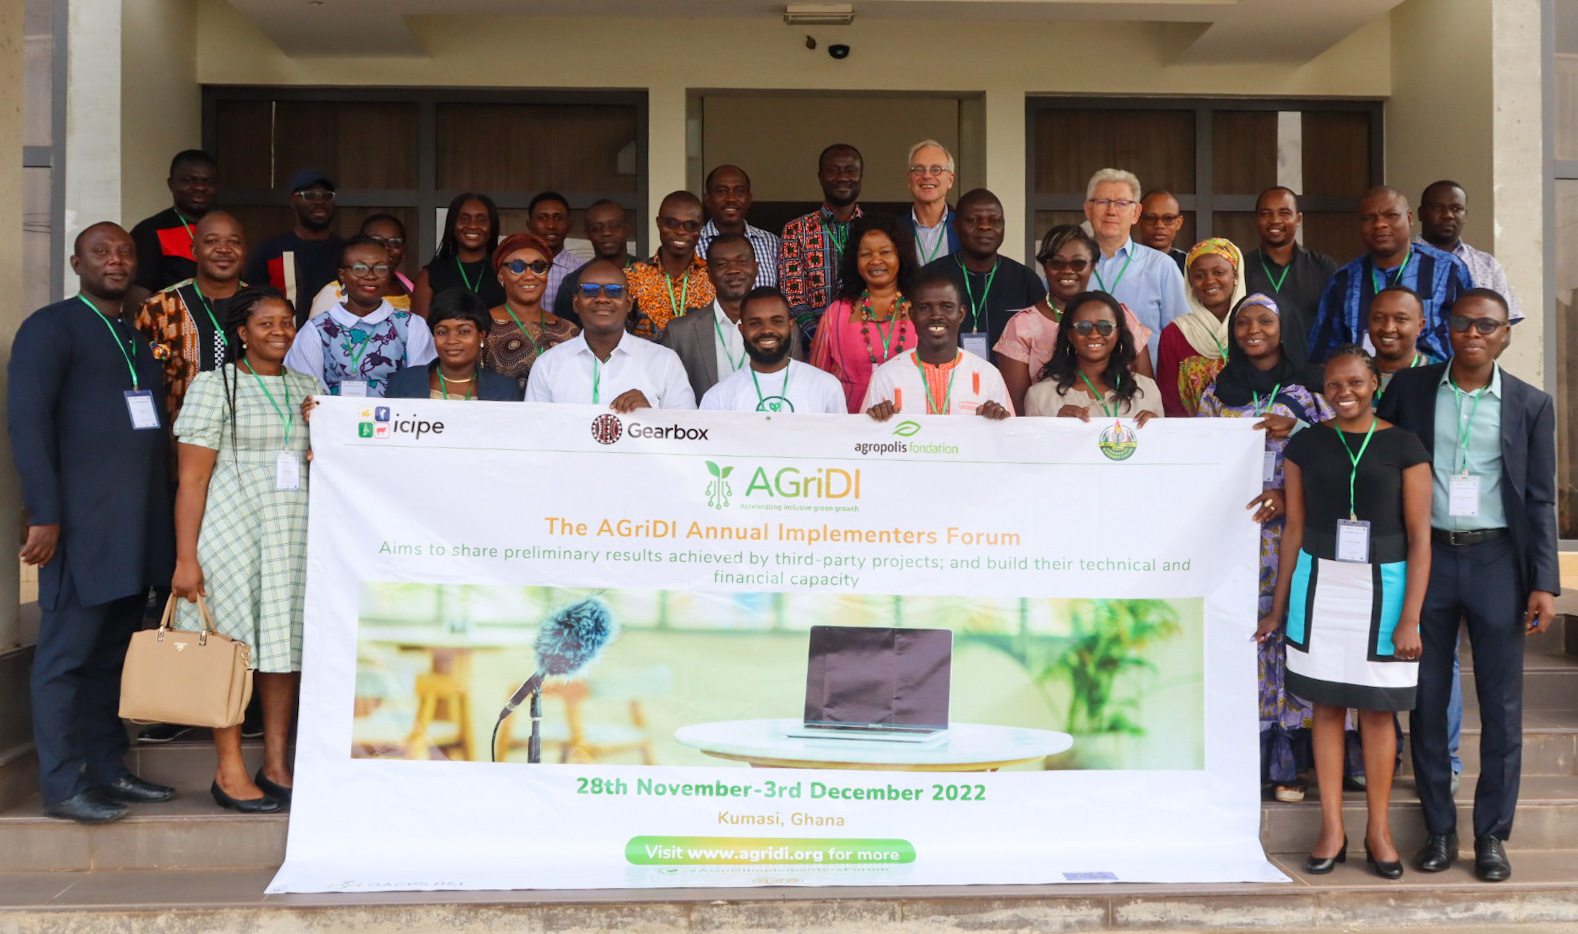 AGriDI conducts Annual Implementers Forum